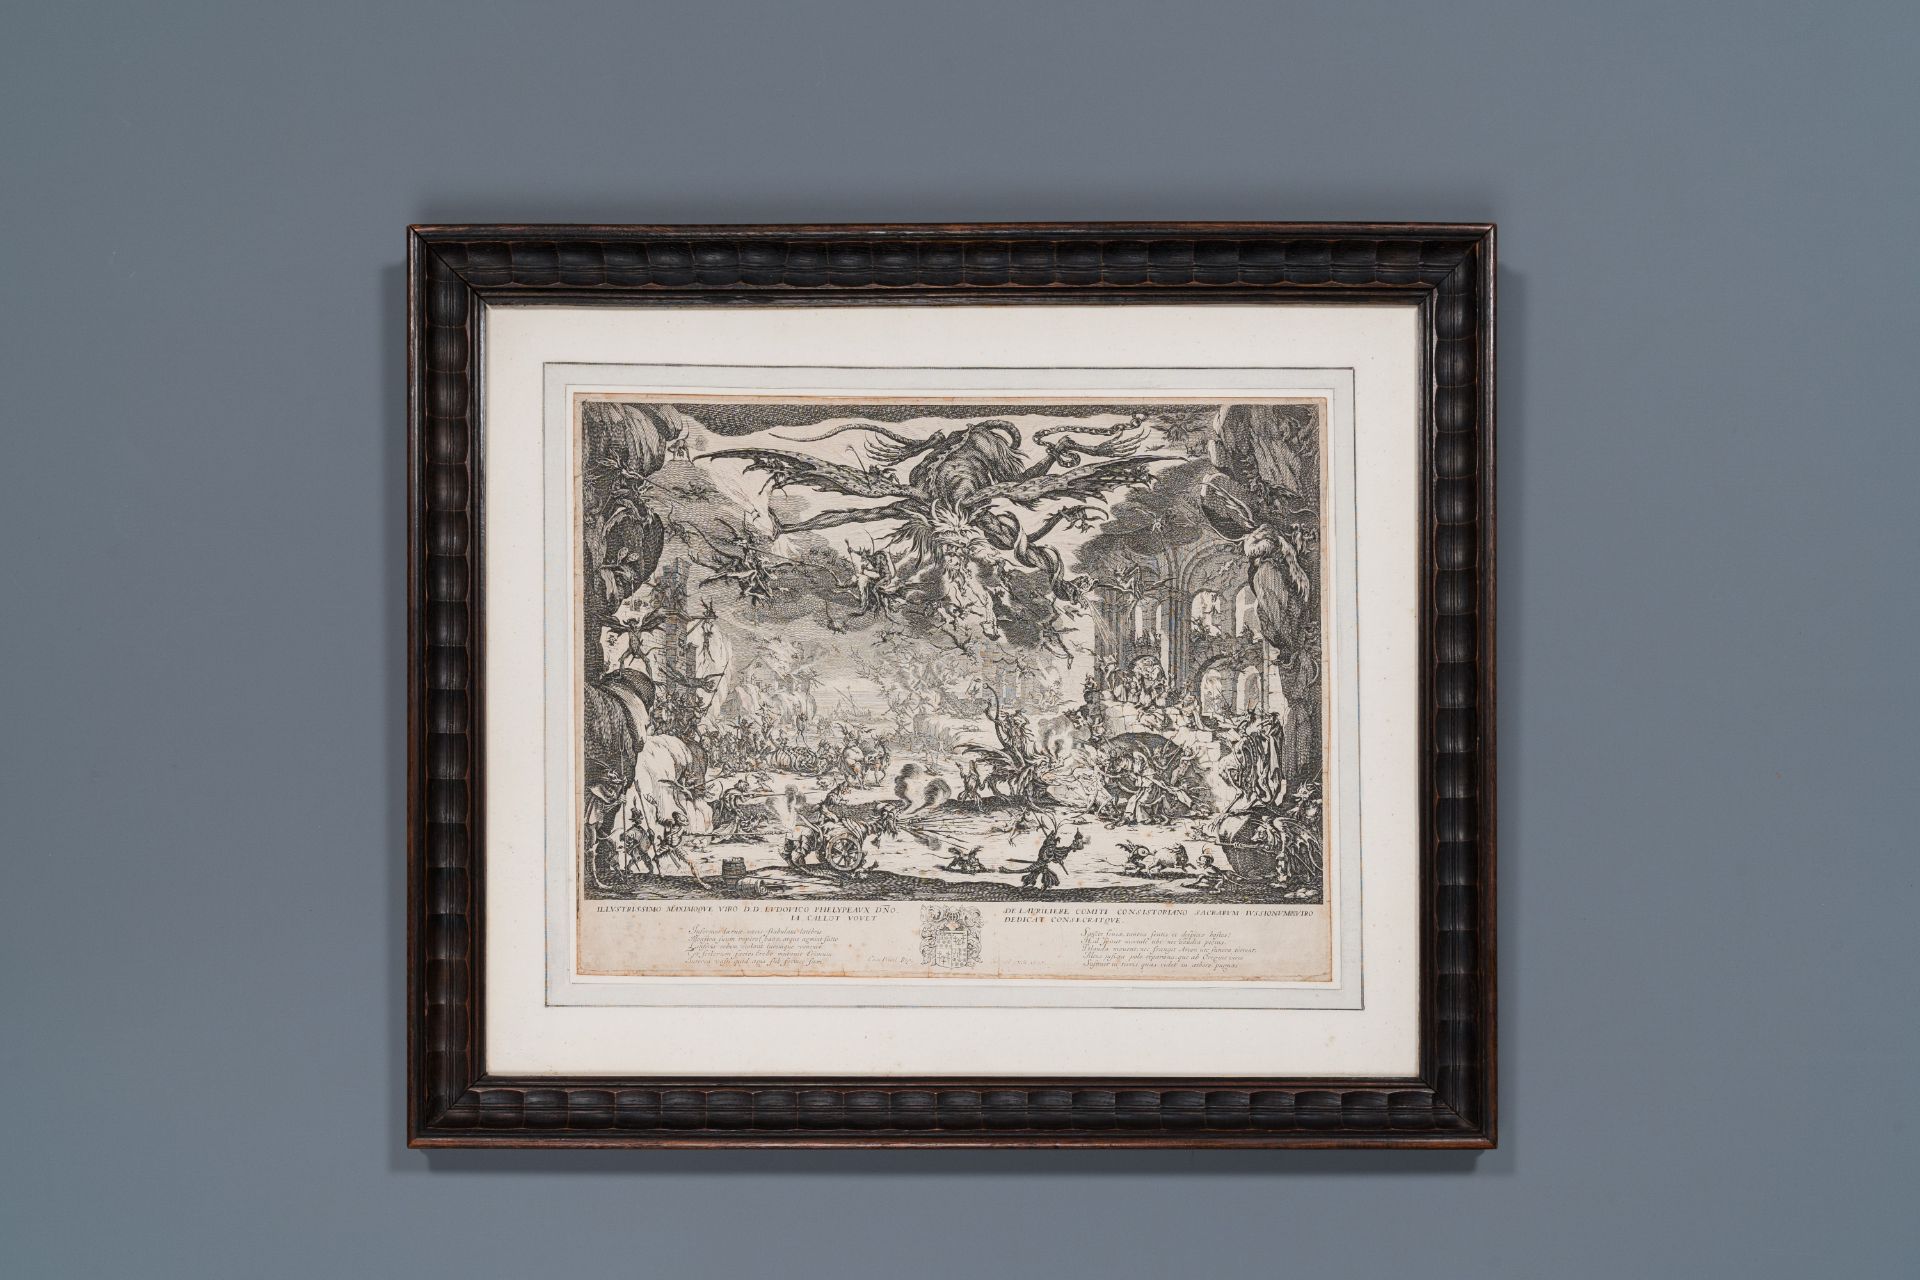 Jacques Callot (1592Ð1635): 'The temptation of Saint Anthony', engraving on paper, ca. 1635